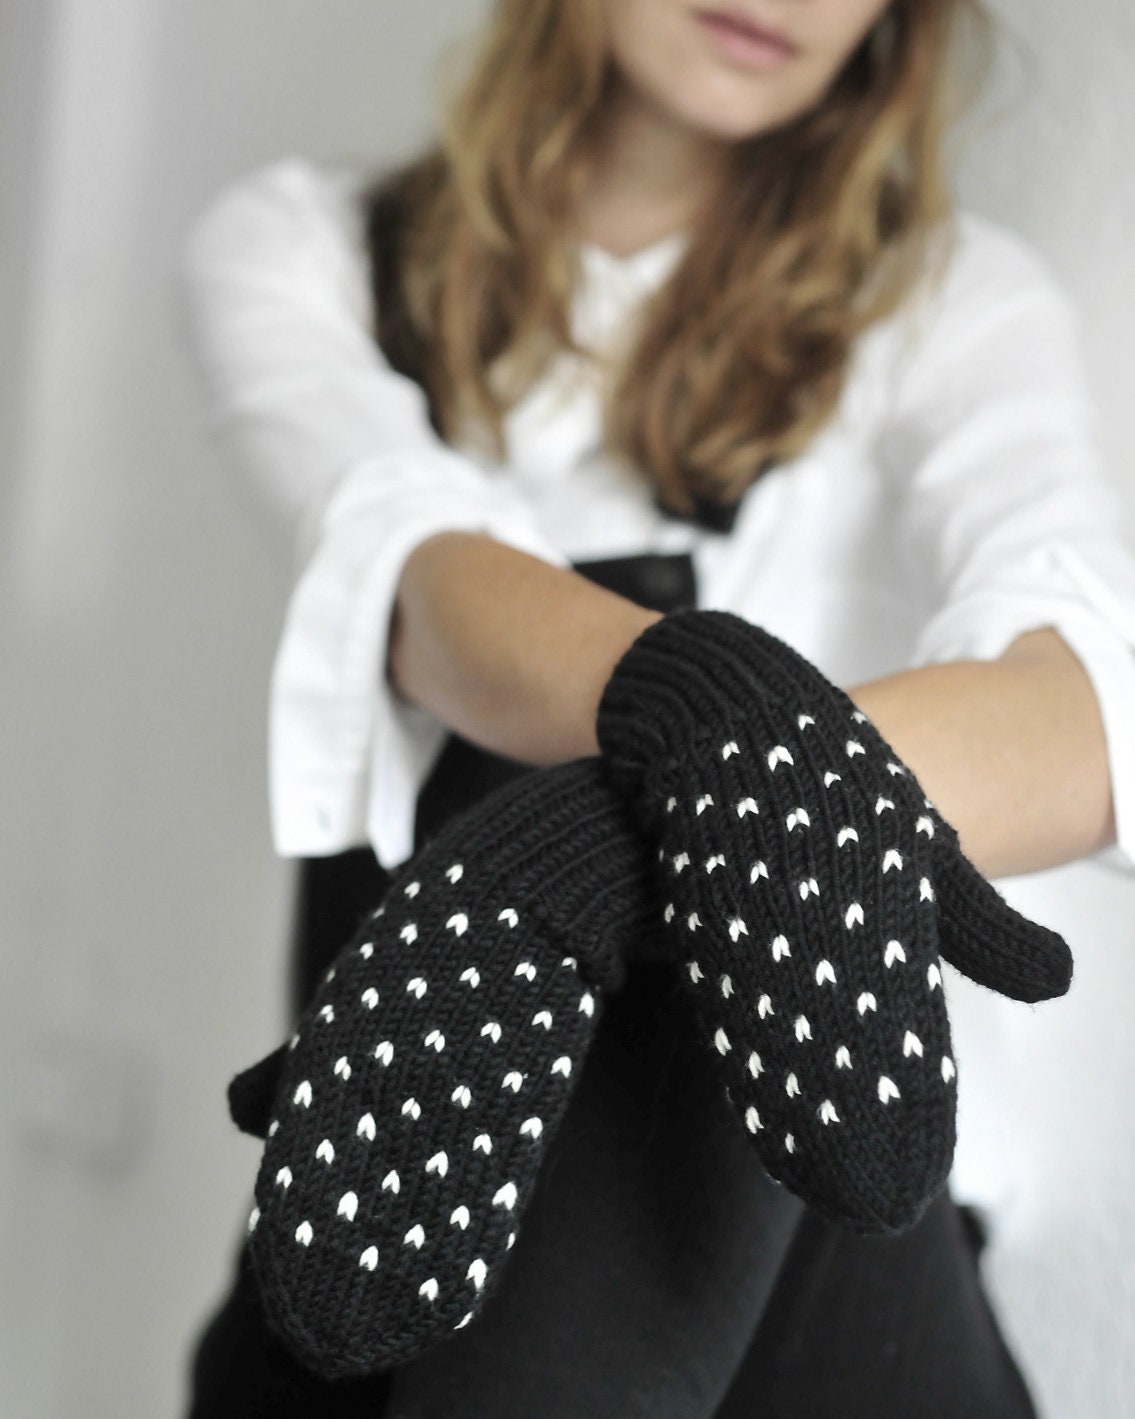 Crochet Mittens and Gloves Patterns